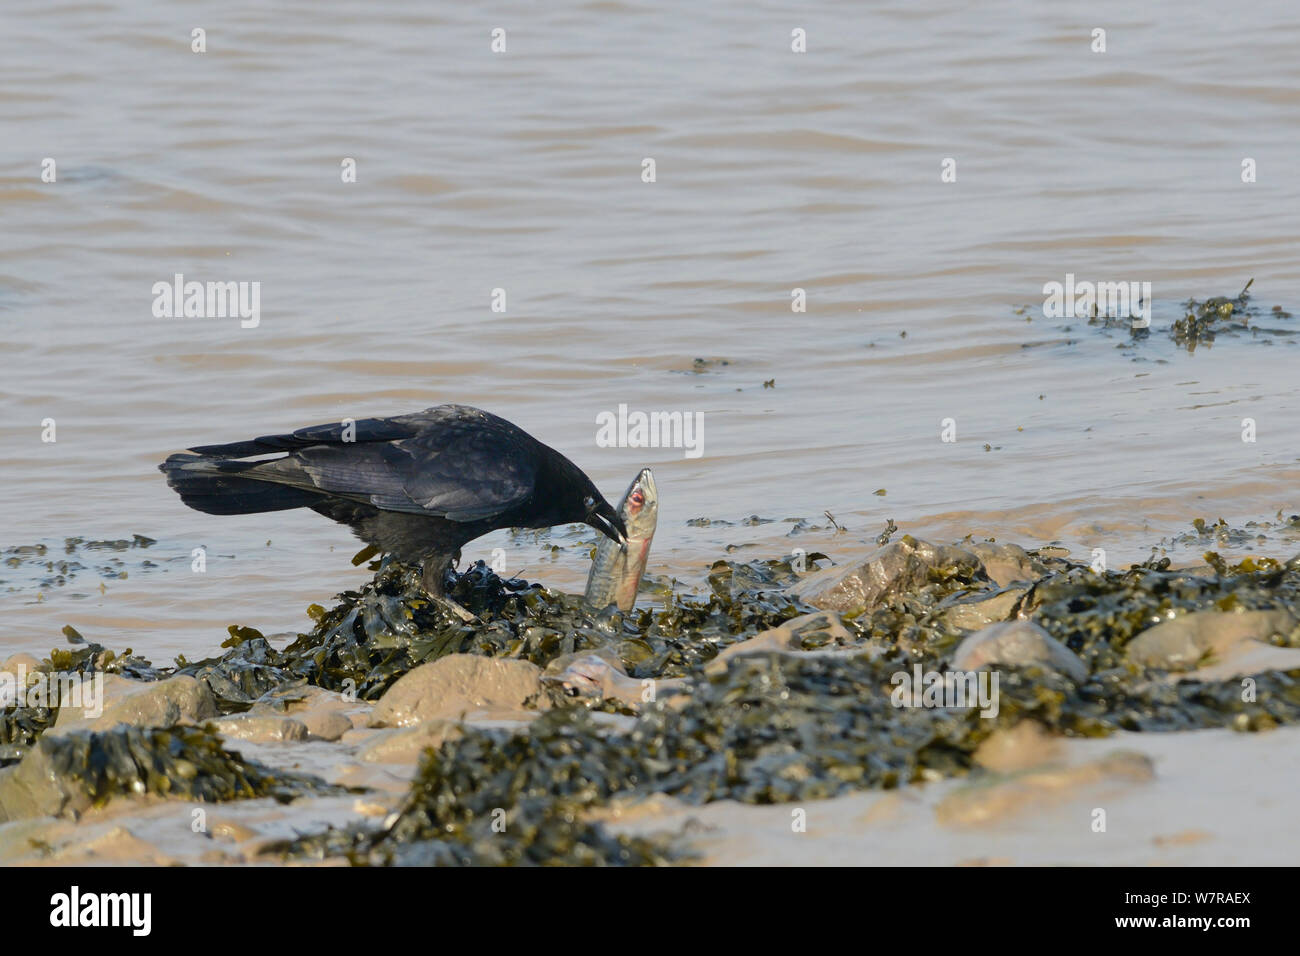 Carrion crow (Corvus corone) scavenging on a dead Mackerel (Scomber scombrus) washed up on the tideline, Severn estuary, Somerset, UK, March. Stock Photo